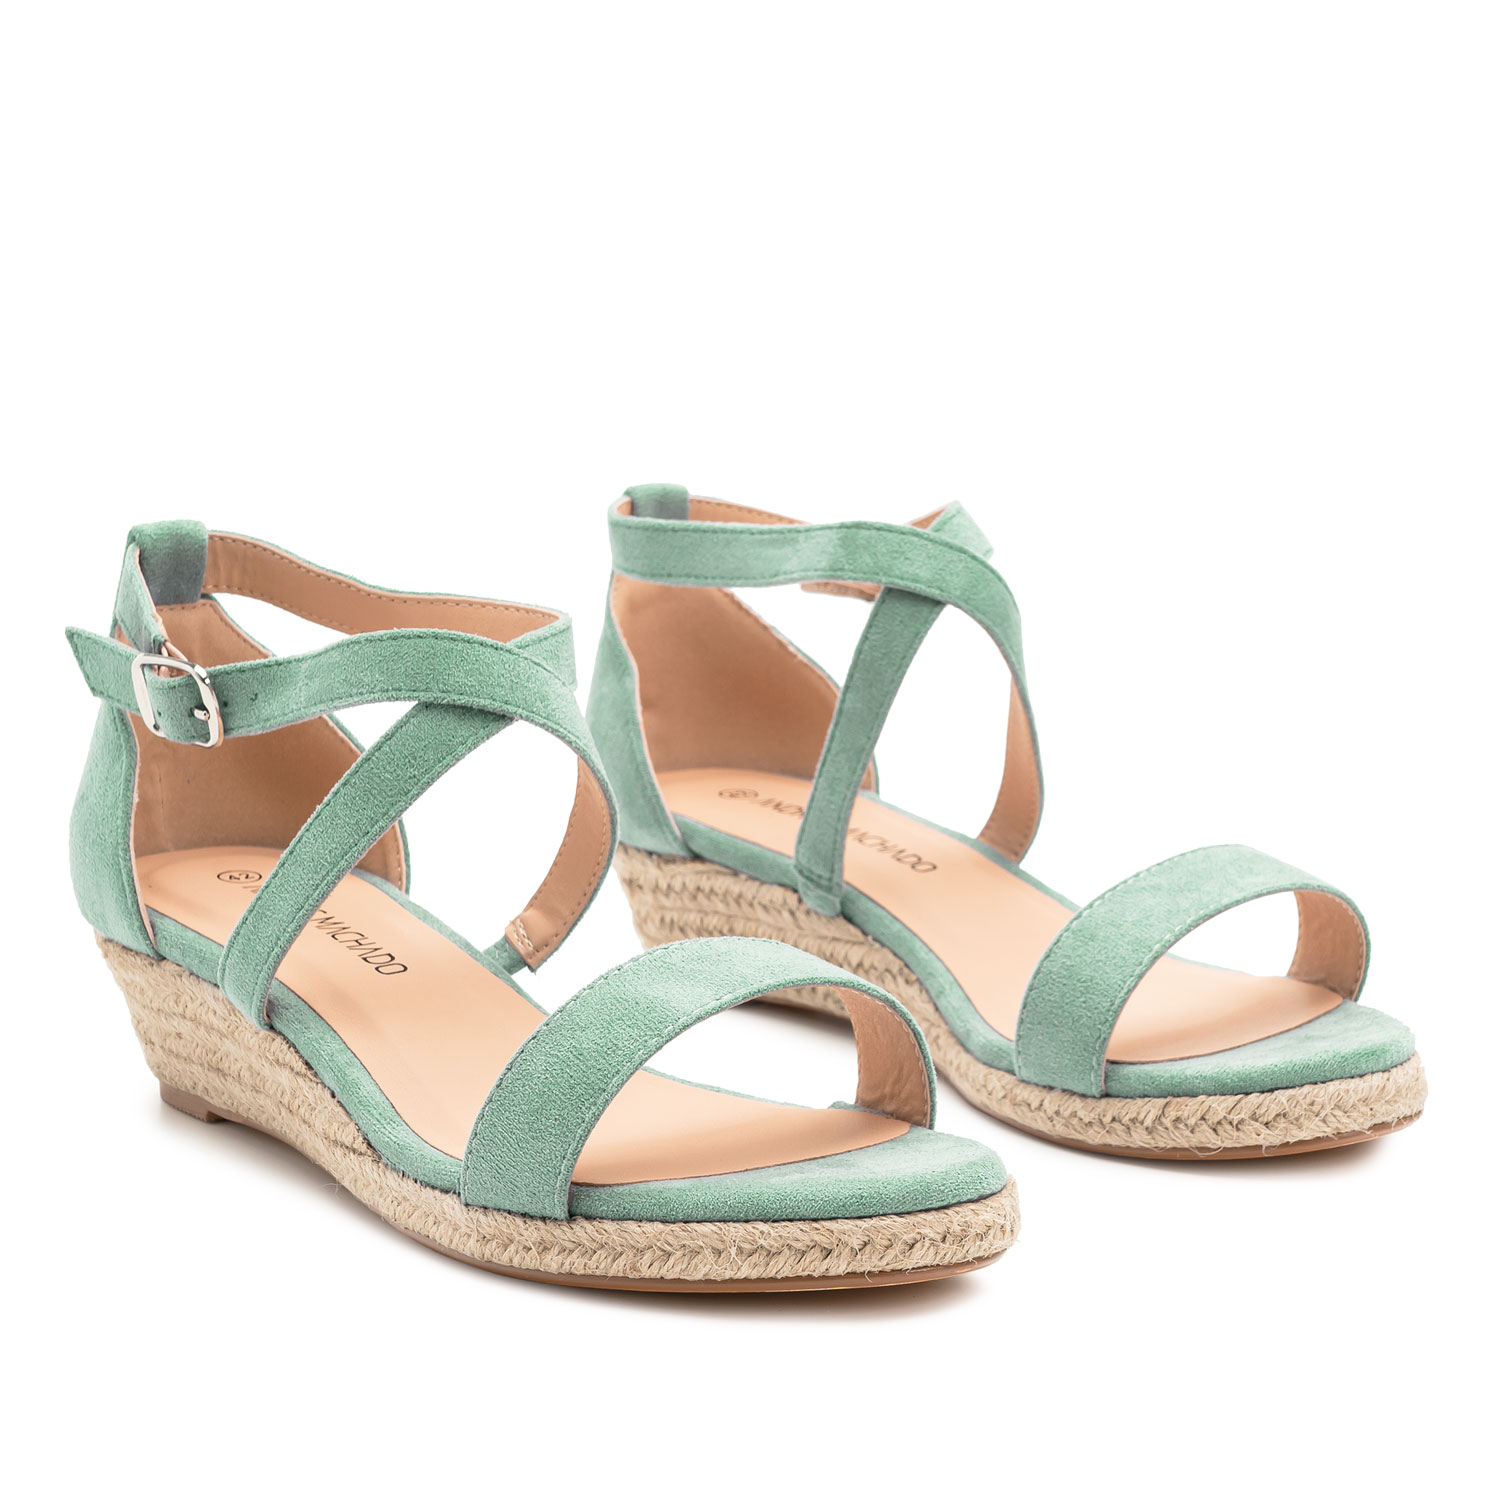 Mint Faux Suede Sandals with Jute Wedge 